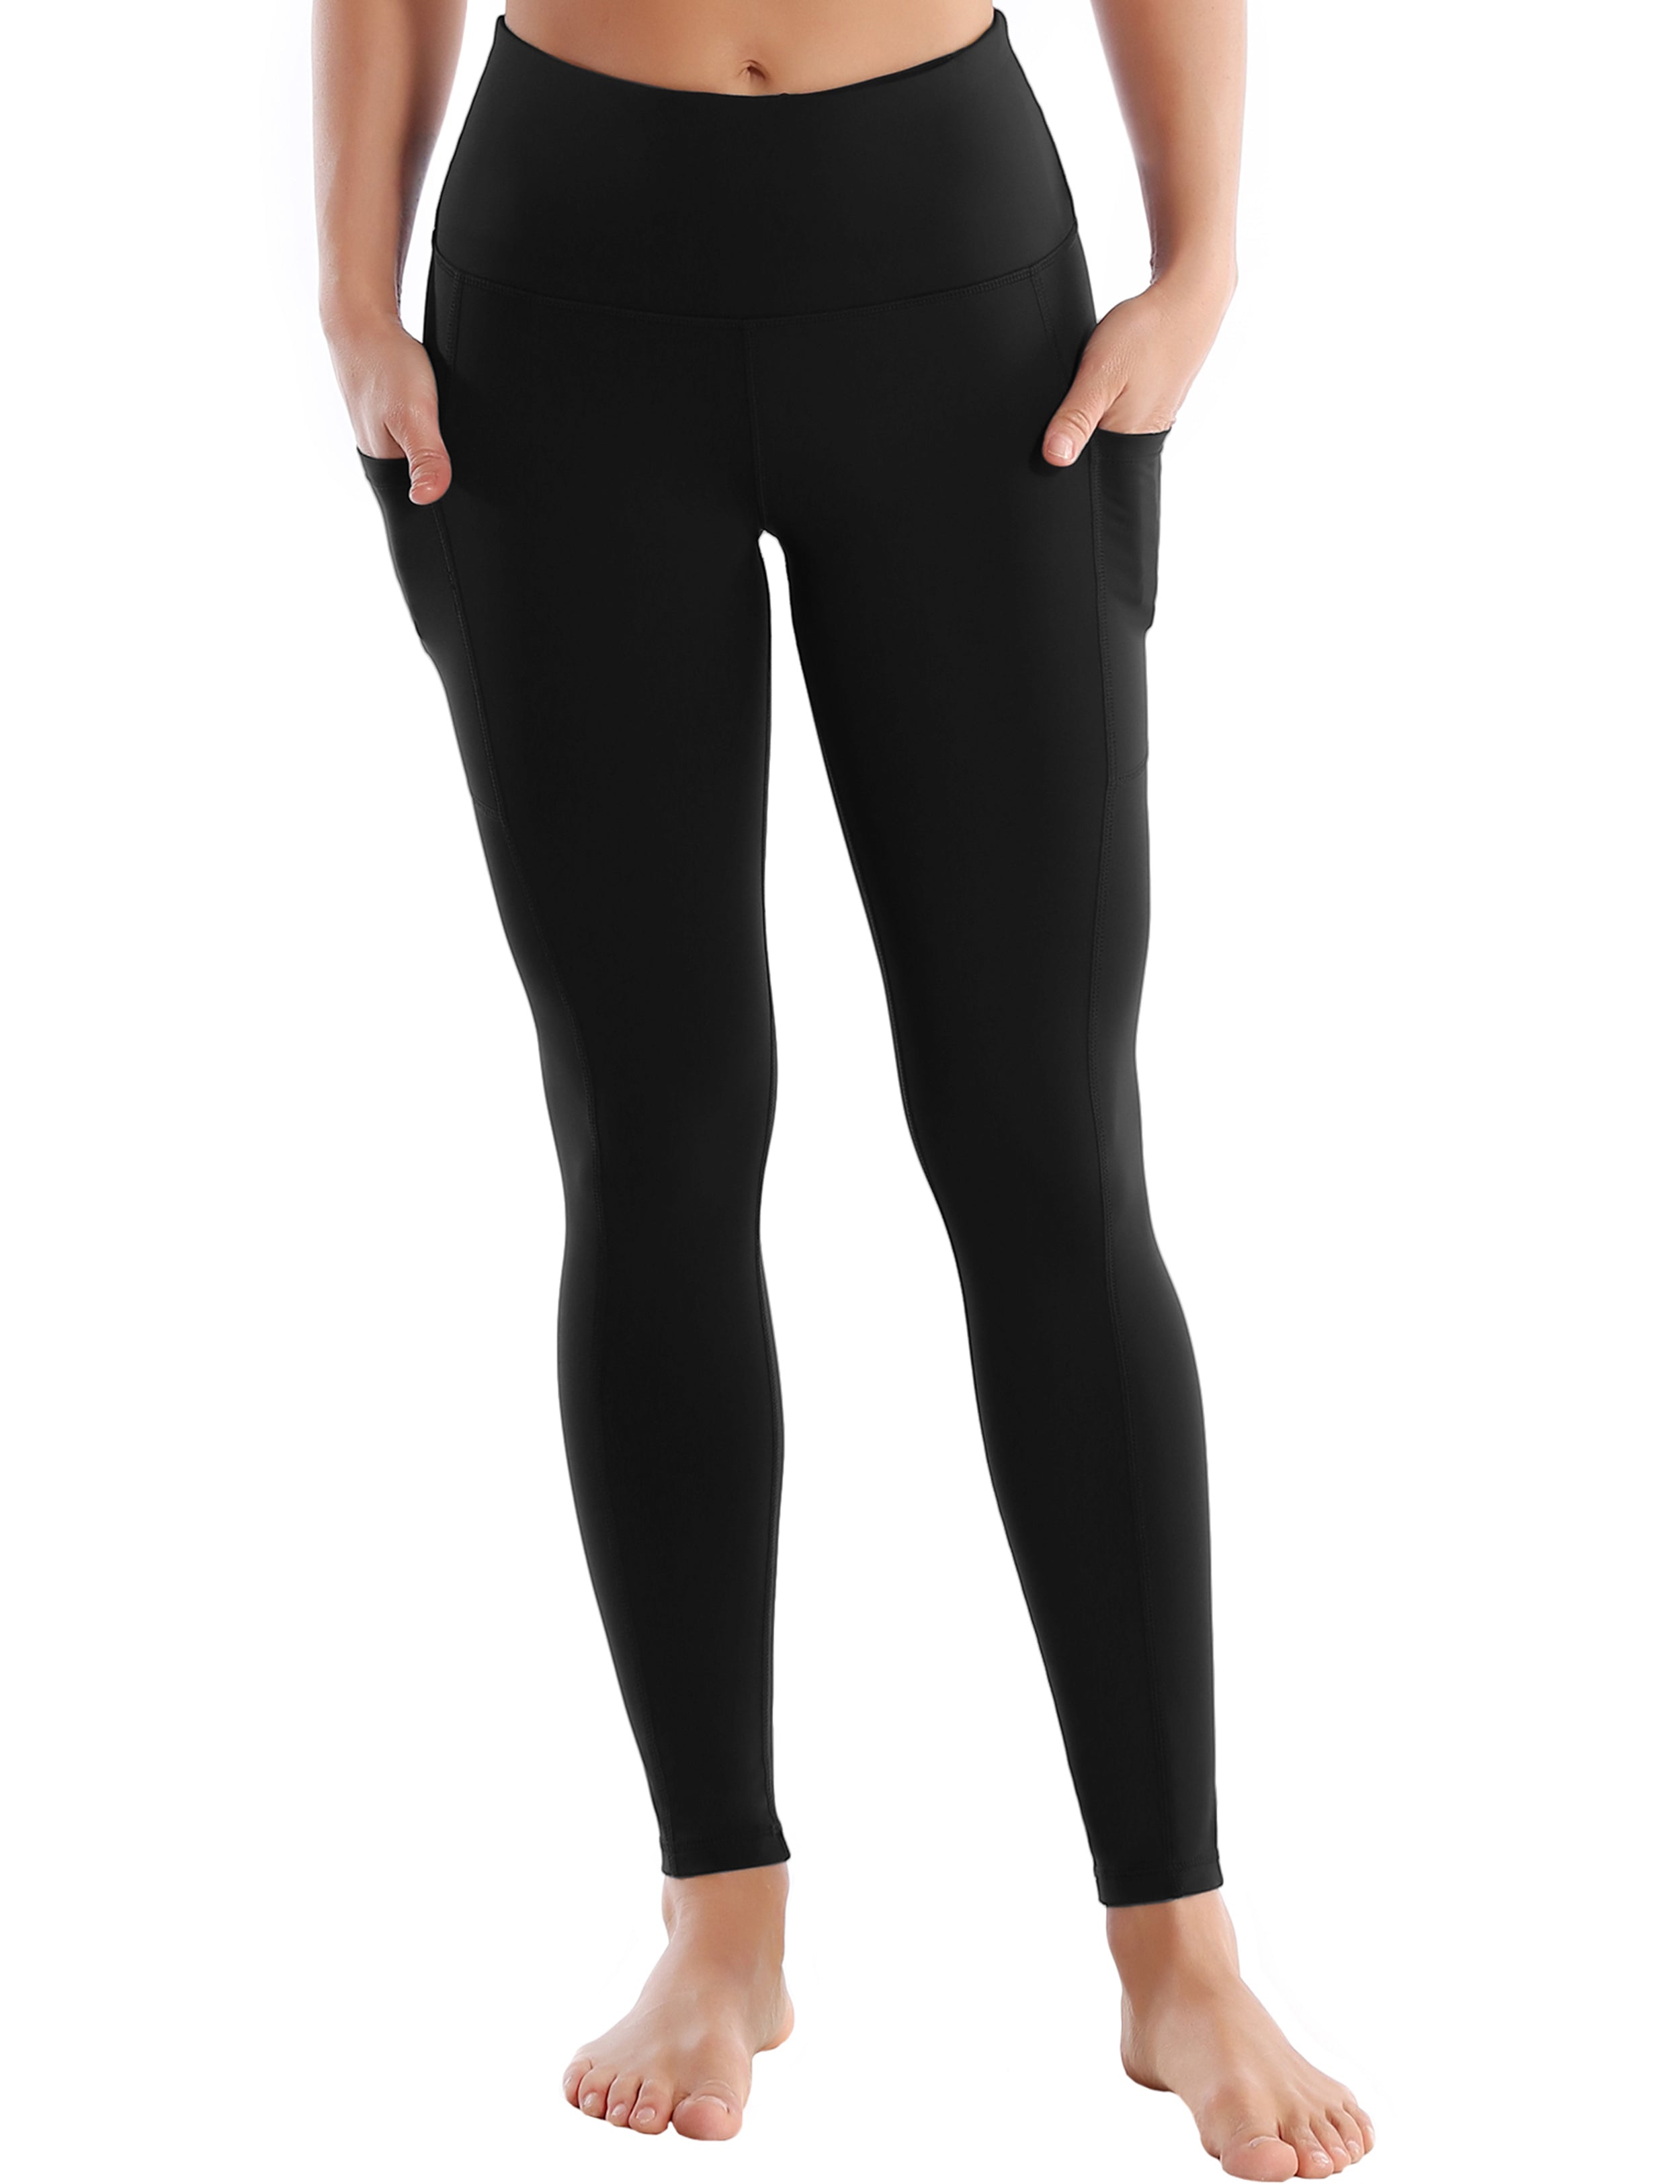 Hip Line Side Pockets Yoga Pants black Sexy Hip Line Side Pockets 75%Nylon/25%Spandex Fabric doesn't attract lint easily 4-way stretch No see-through Moisture-wicking Tummy control Inner pocket Two lengths